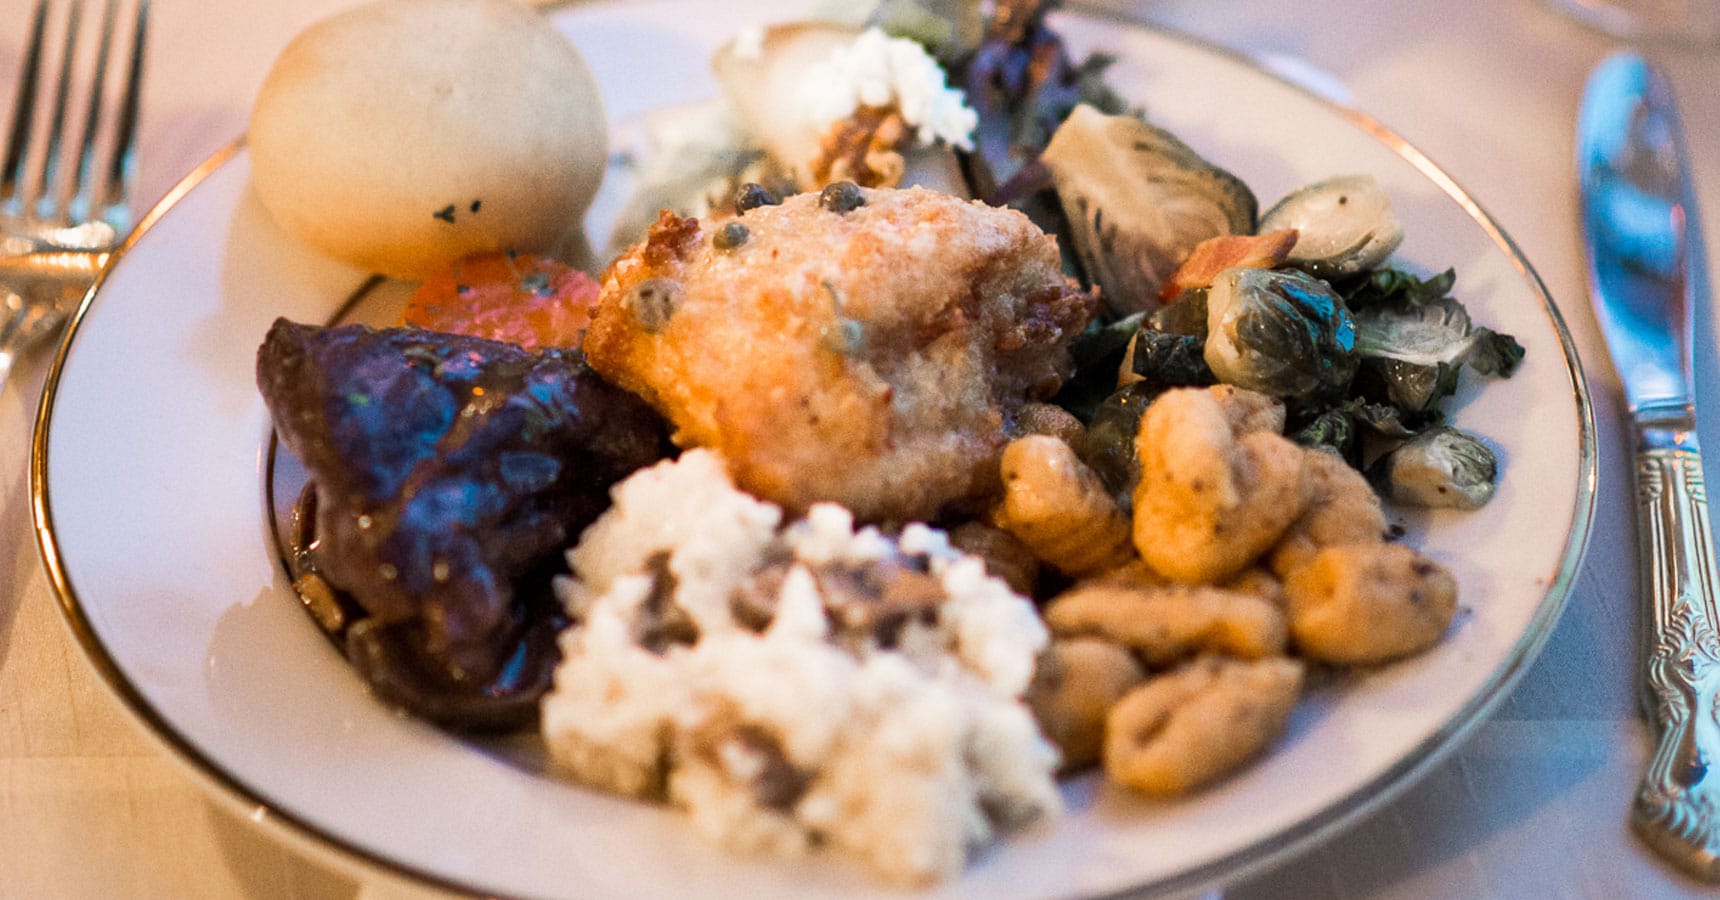 Braised Beef Short Ribs, Chicken Picatta Roulade, Risotto, Sweet Potato Gnocchi & Brussel Sprouts platted